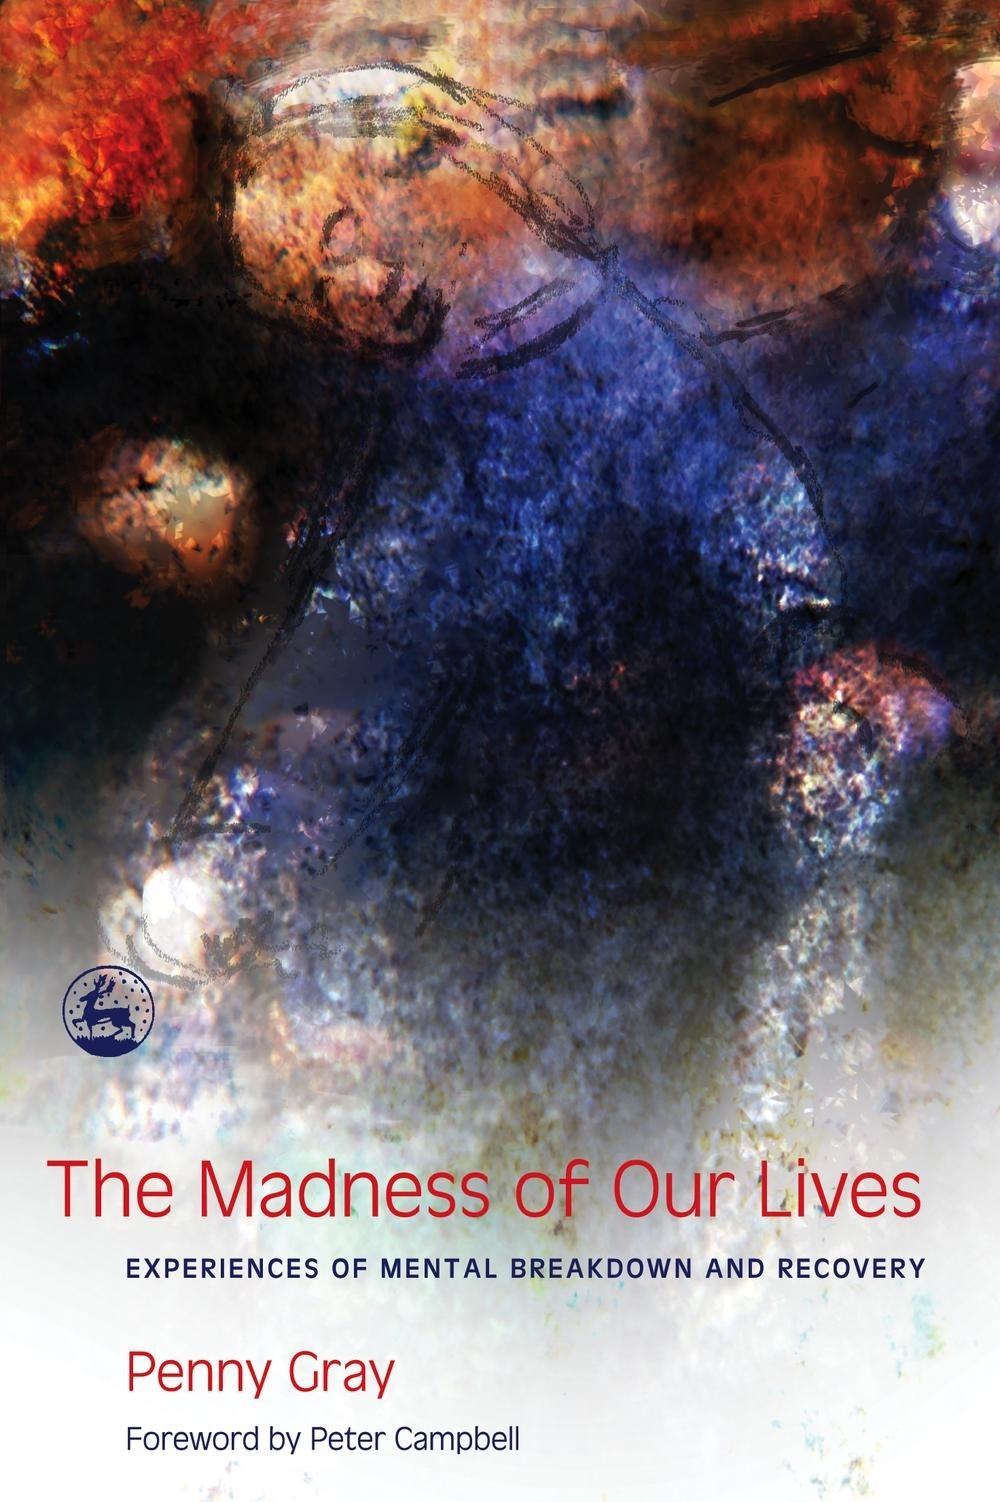 The Madness of Our Lives by Penny Gray